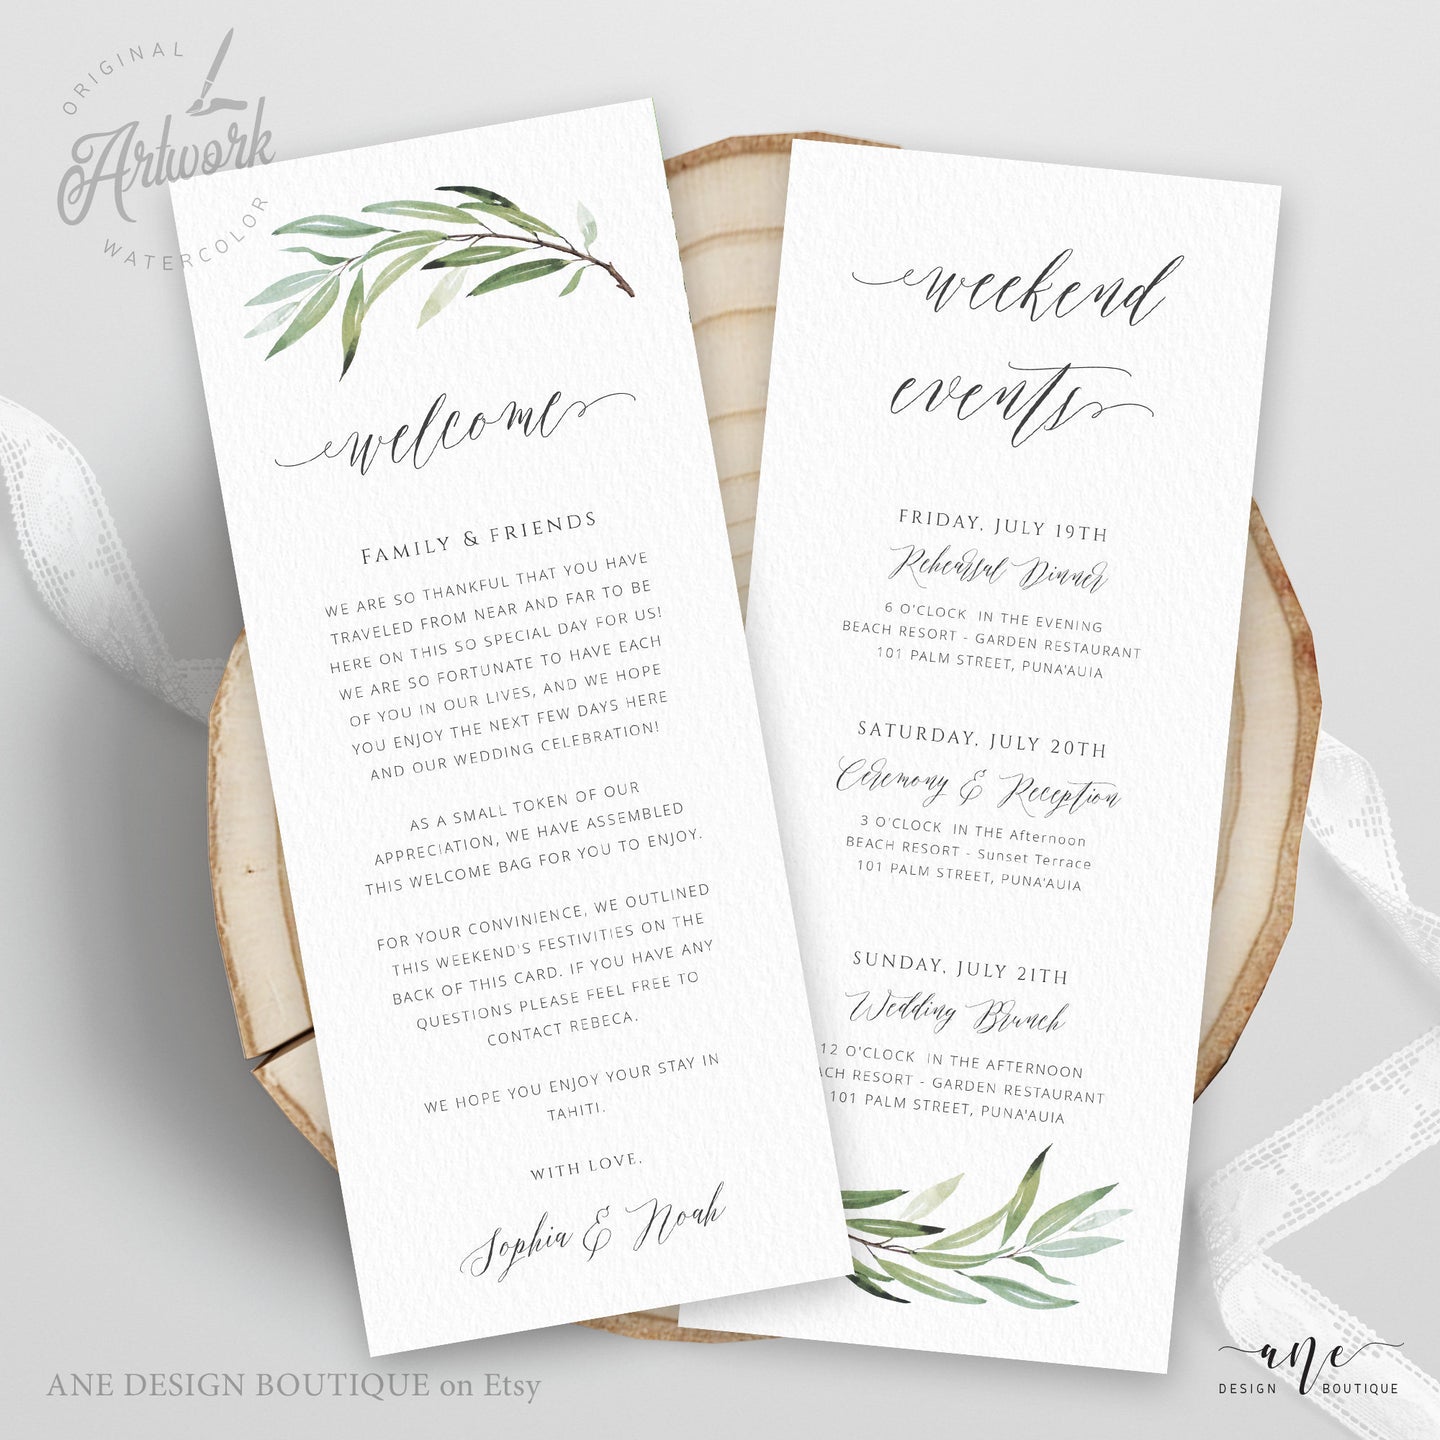 Wedding Welcome Letter & Timeline Template, Order of Events, Welcome Bag  Note and Itinerary, INSTANT DOWNLOAD, 100% Editable Text #076-123WB